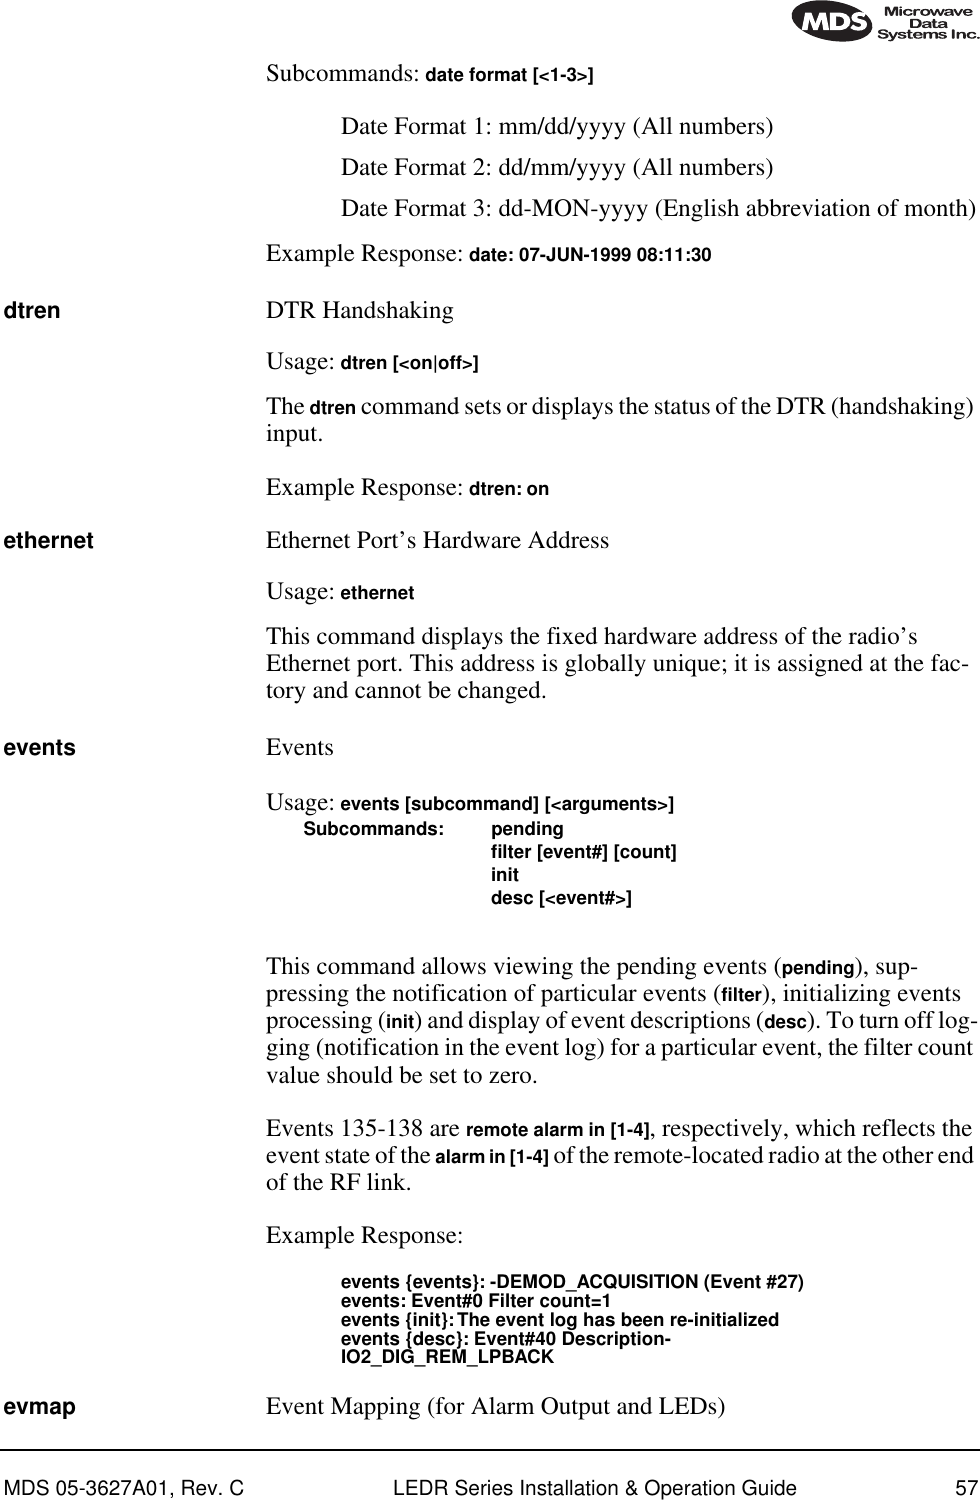 MDS 05-3627A01, Rev. C LEDR Series Installation &amp; Operation Guide 57Subcommands: date format [&lt;1-3&gt;] Date Format 1: mm/dd/yyyy (All numbers)Date Format 2: dd/mm/yyyy (All numbers)Date Format 3: dd-MON-yyyy (English abbreviation of month)Example Response: date: 07-JUN-1999 08:11:30dtren DTR HandshakingUsage: dtren [&lt;on|off&gt;]The dtren command sets or displays the status of the DTR (handshaking) input.Example Response: dtren: onethernet Ethernet Port’s Hardware AddressUsage: ethernet This command displays the fixed hardware address of the radio’s Ethernet port. This address is globally unique; it is assigned at the fac-tory and cannot be changed.events EventsUsage: events [subcommand] [&lt;arguments&gt;]Subcommands: pendingﬁlter [event#] [count]initdesc [&lt;event#&gt;]This command allows viewing the pending events (pending), sup-pressing the notification of particular events (filter), initializing events processing (init) and display of event descriptions (desc). To turn off log-ging (notification in the event log) for a particular event, the filter count value should be set to zero.Events 135-138 are remote alarm in [1-4], respectively, which reflects the event state of the alarm in [1-4] of the remote-located radio at the other end of the RF link.Example Response:events {events}: -DEMOD_ACQUISITION (Event #27)events: Event#0 Filter count=1events {init}: The event log has been re-initializedevents {desc}: Event#40 Description-IO2_DIG_REM_LPBACKevmap Event Mapping (for Alarm Output and LEDs)